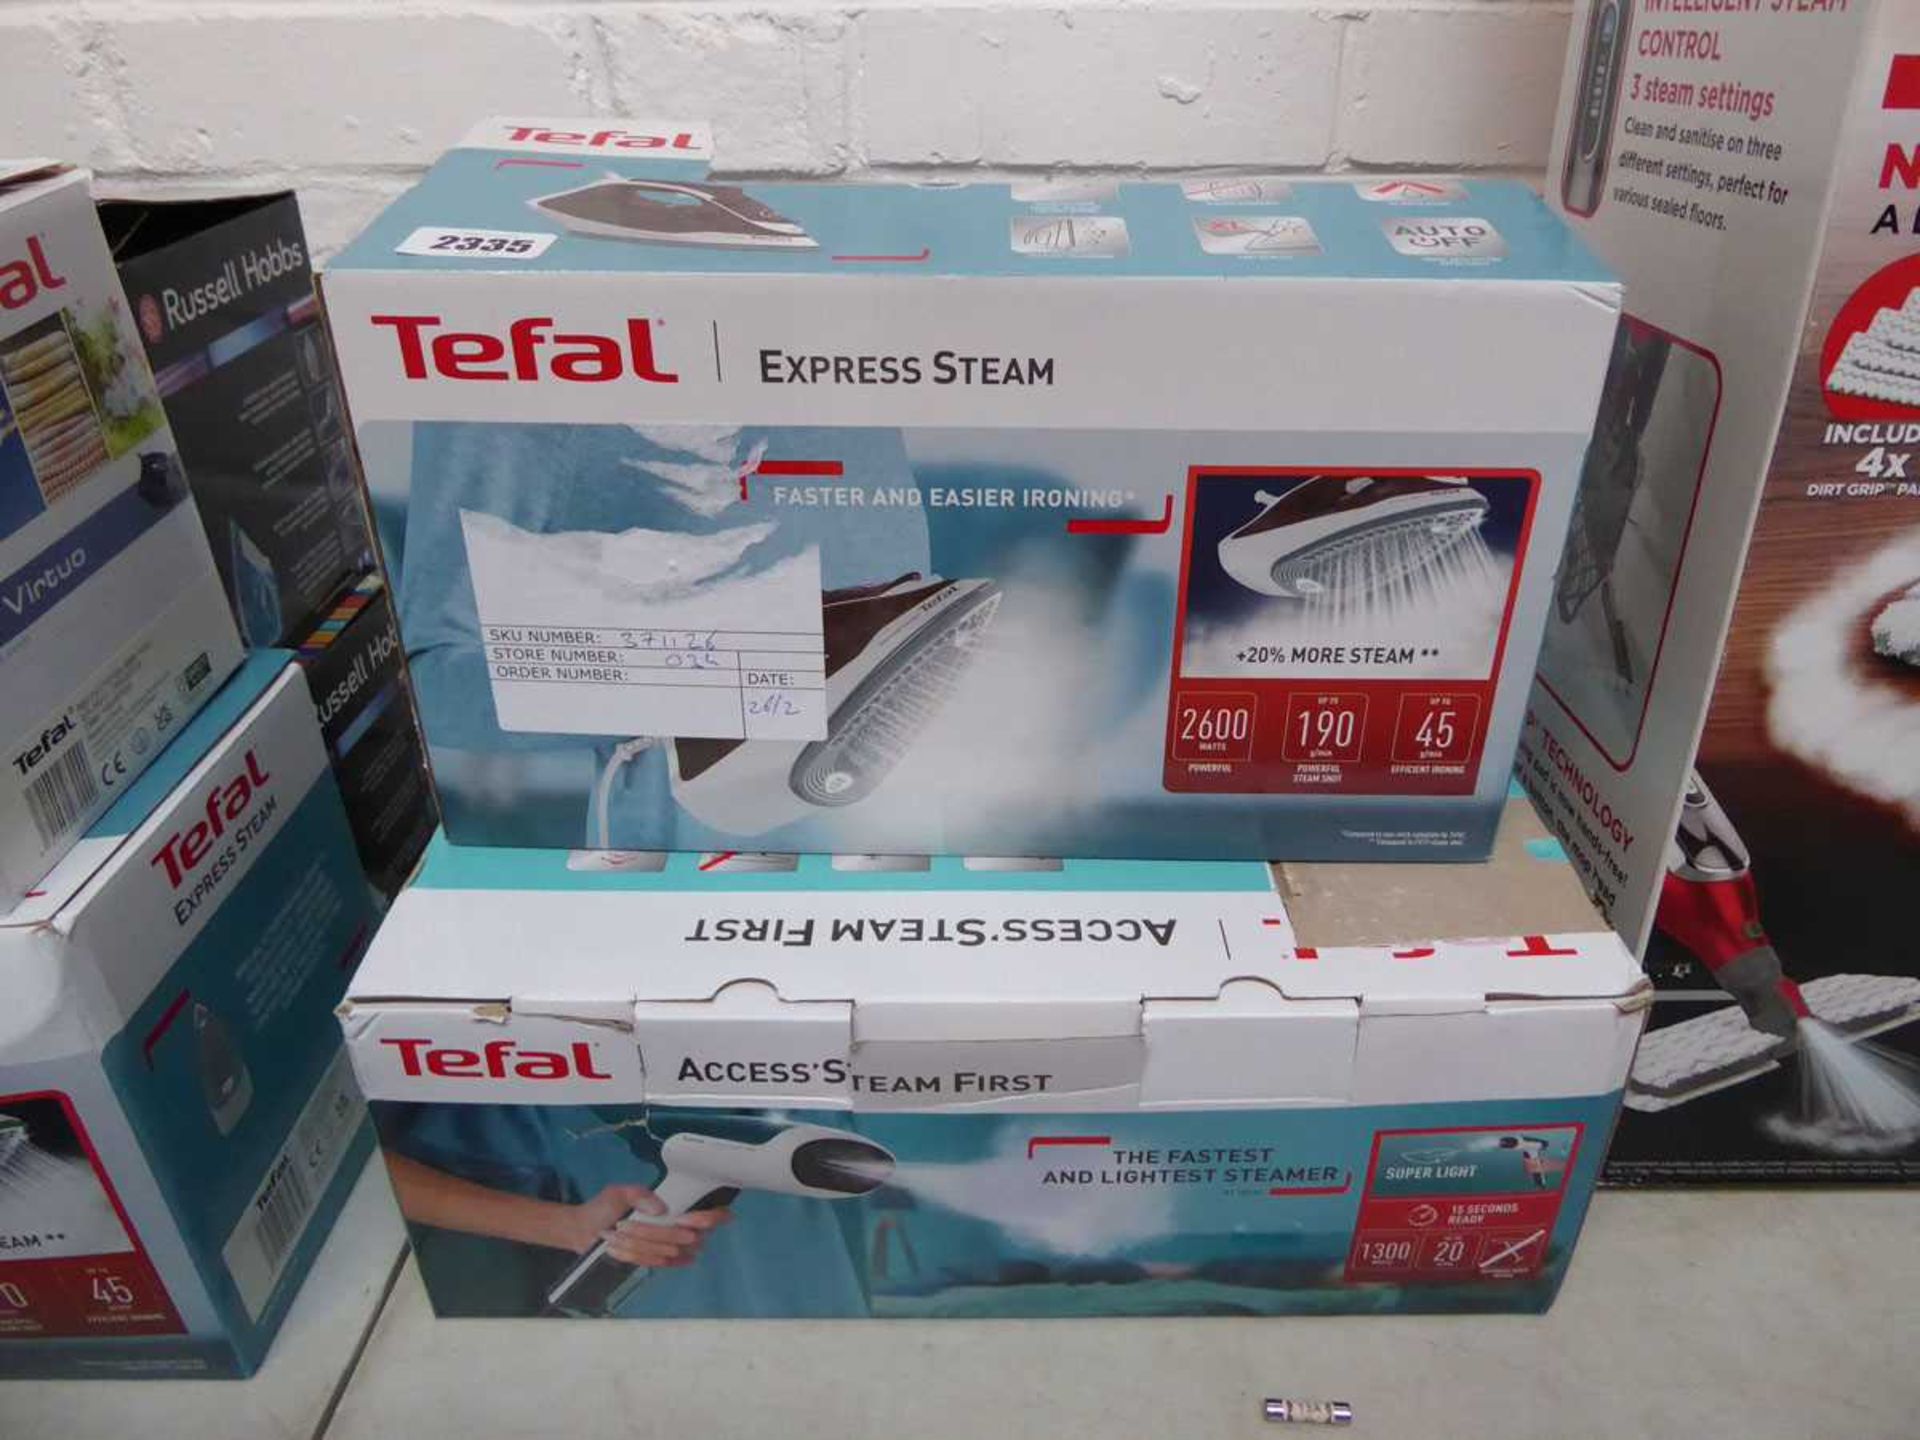 Tefal Express steam iron with Tegal Steam First steamer